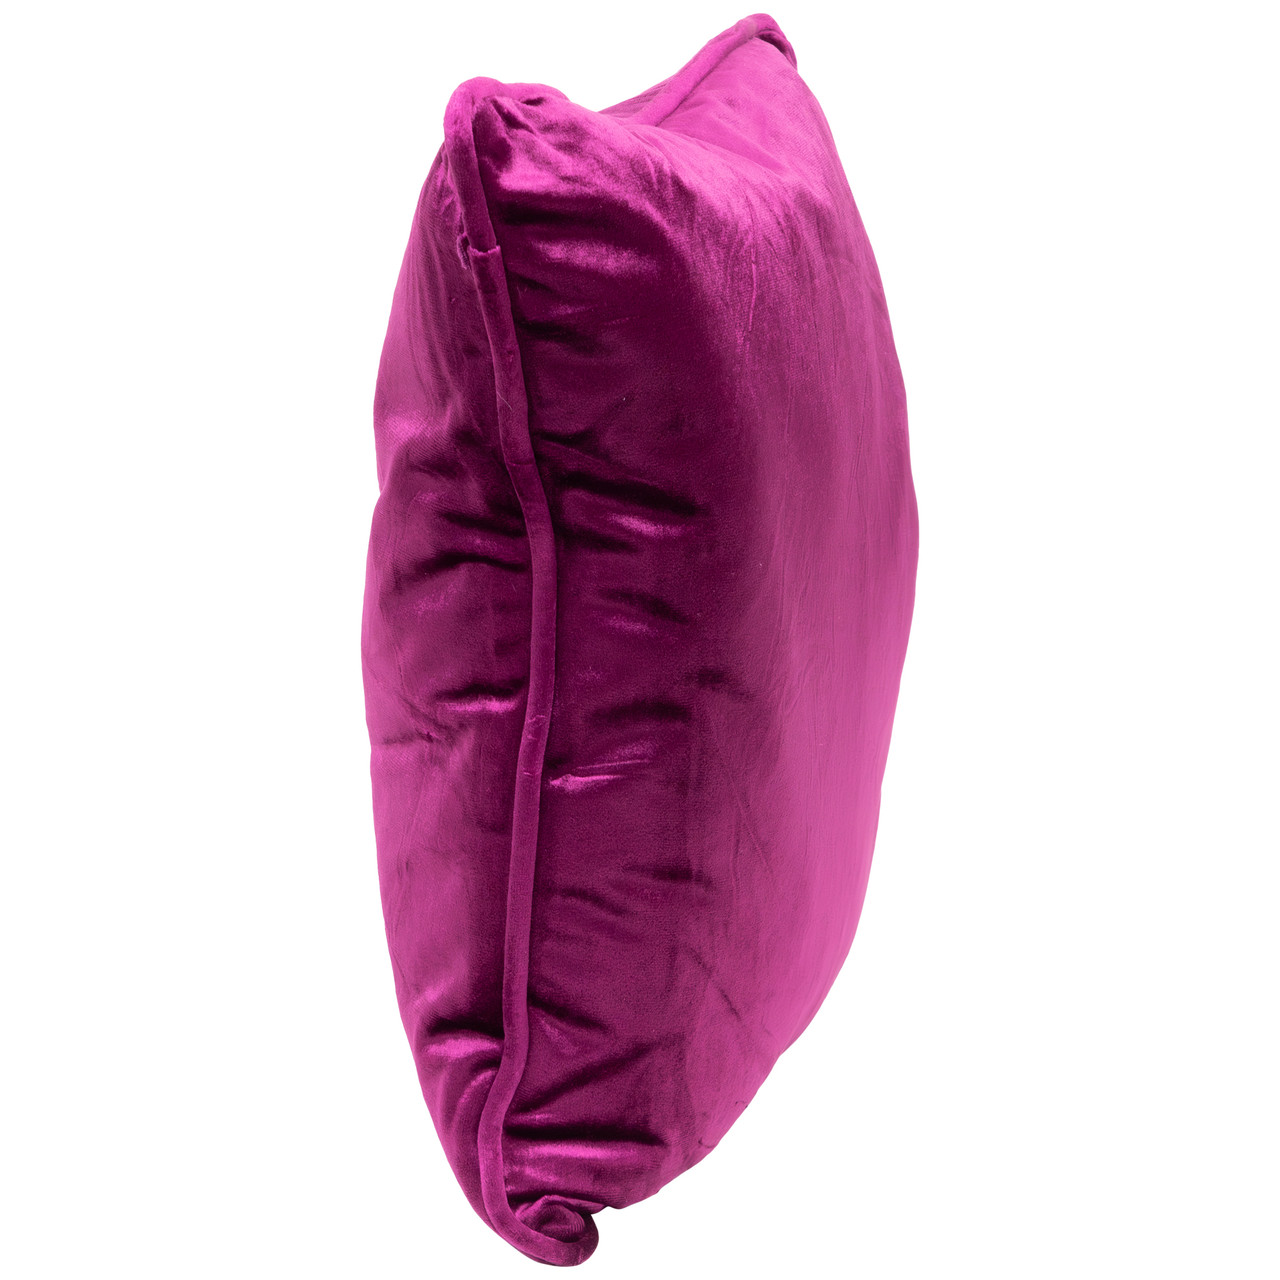 Pillow Perfect Rave Vineyard 17.5-in x 16.5-in 2-Piece Purple